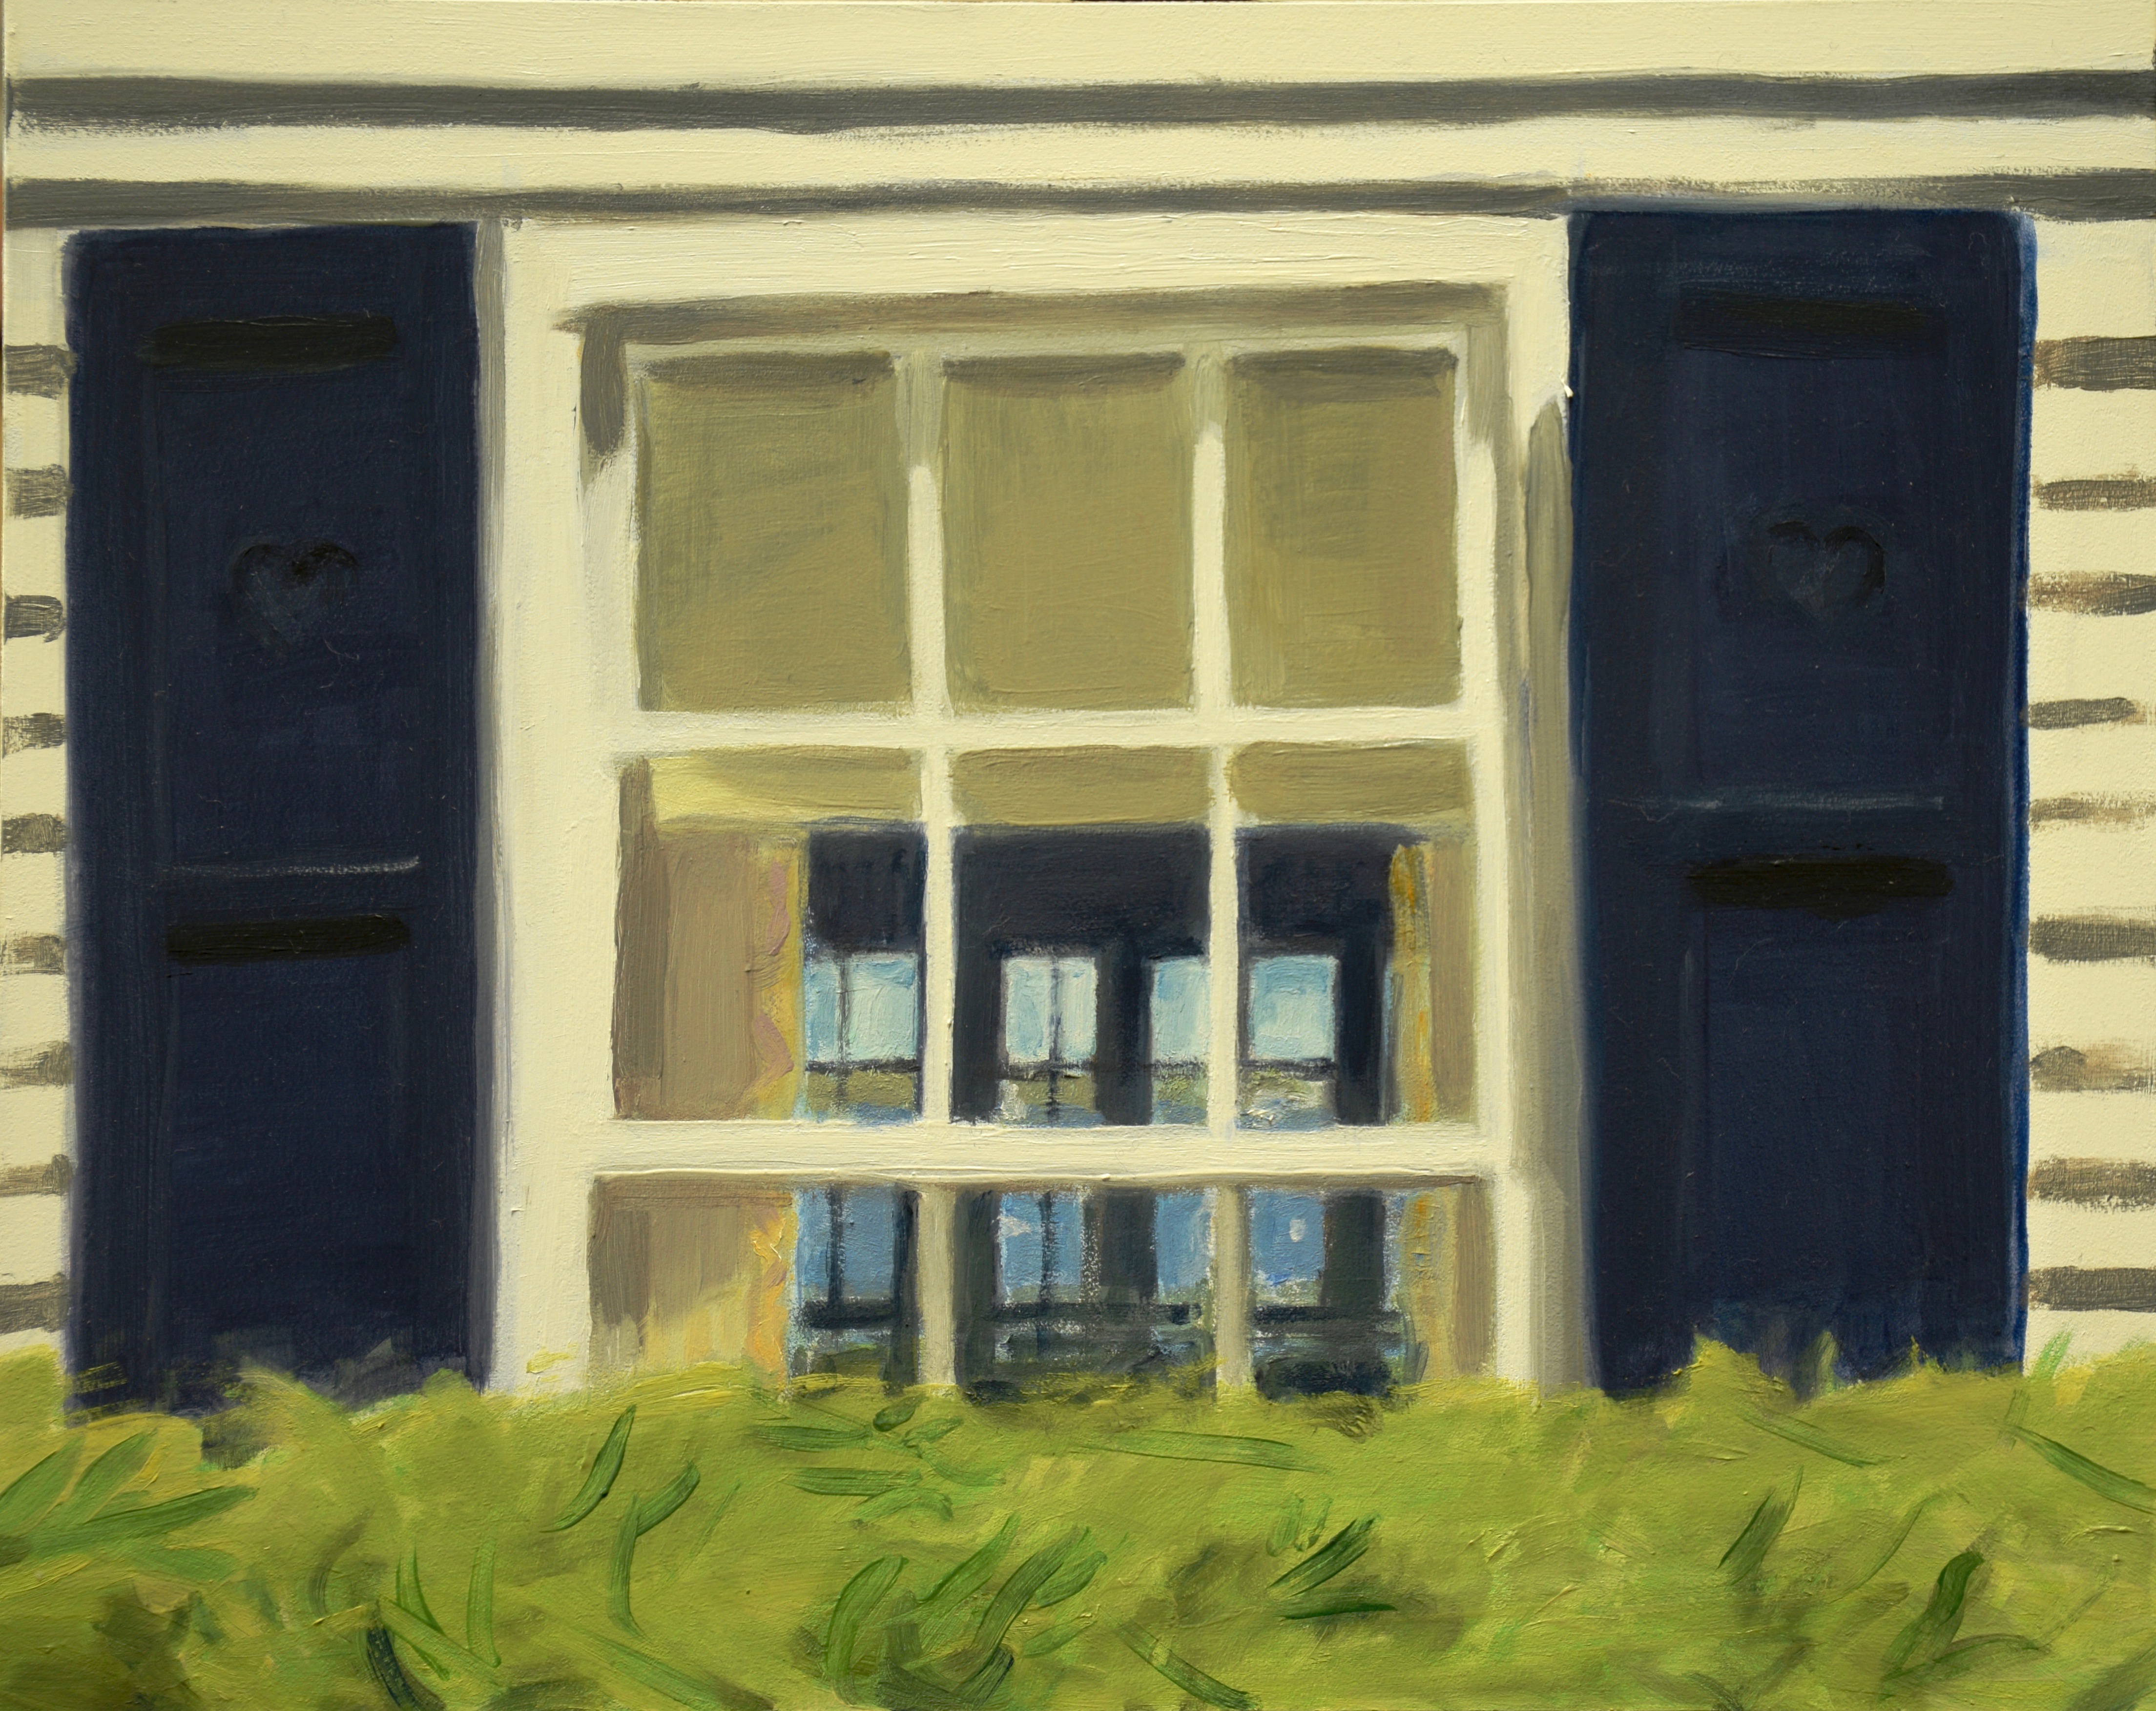 Painting of a window with black shutters and foreground of green bushes.  Looking from outside through the house blue ocean beyond.